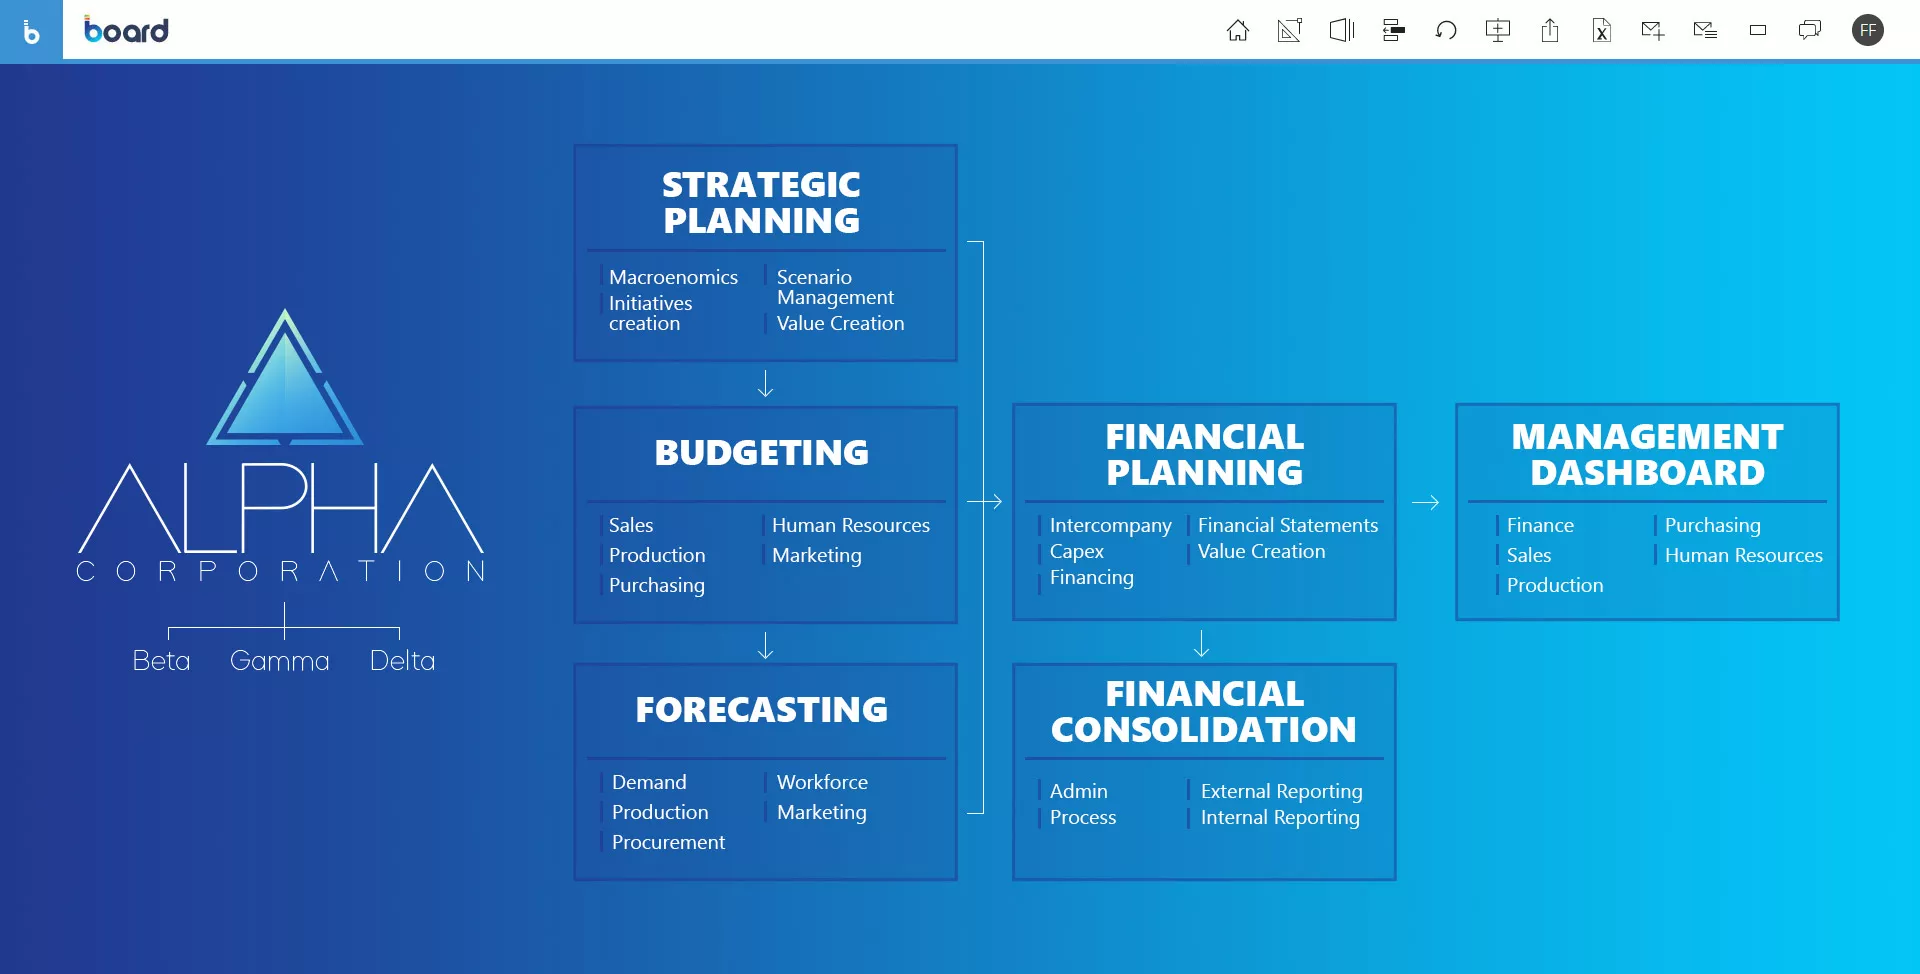 Budgeting, Planning, and Forecasting Image 3